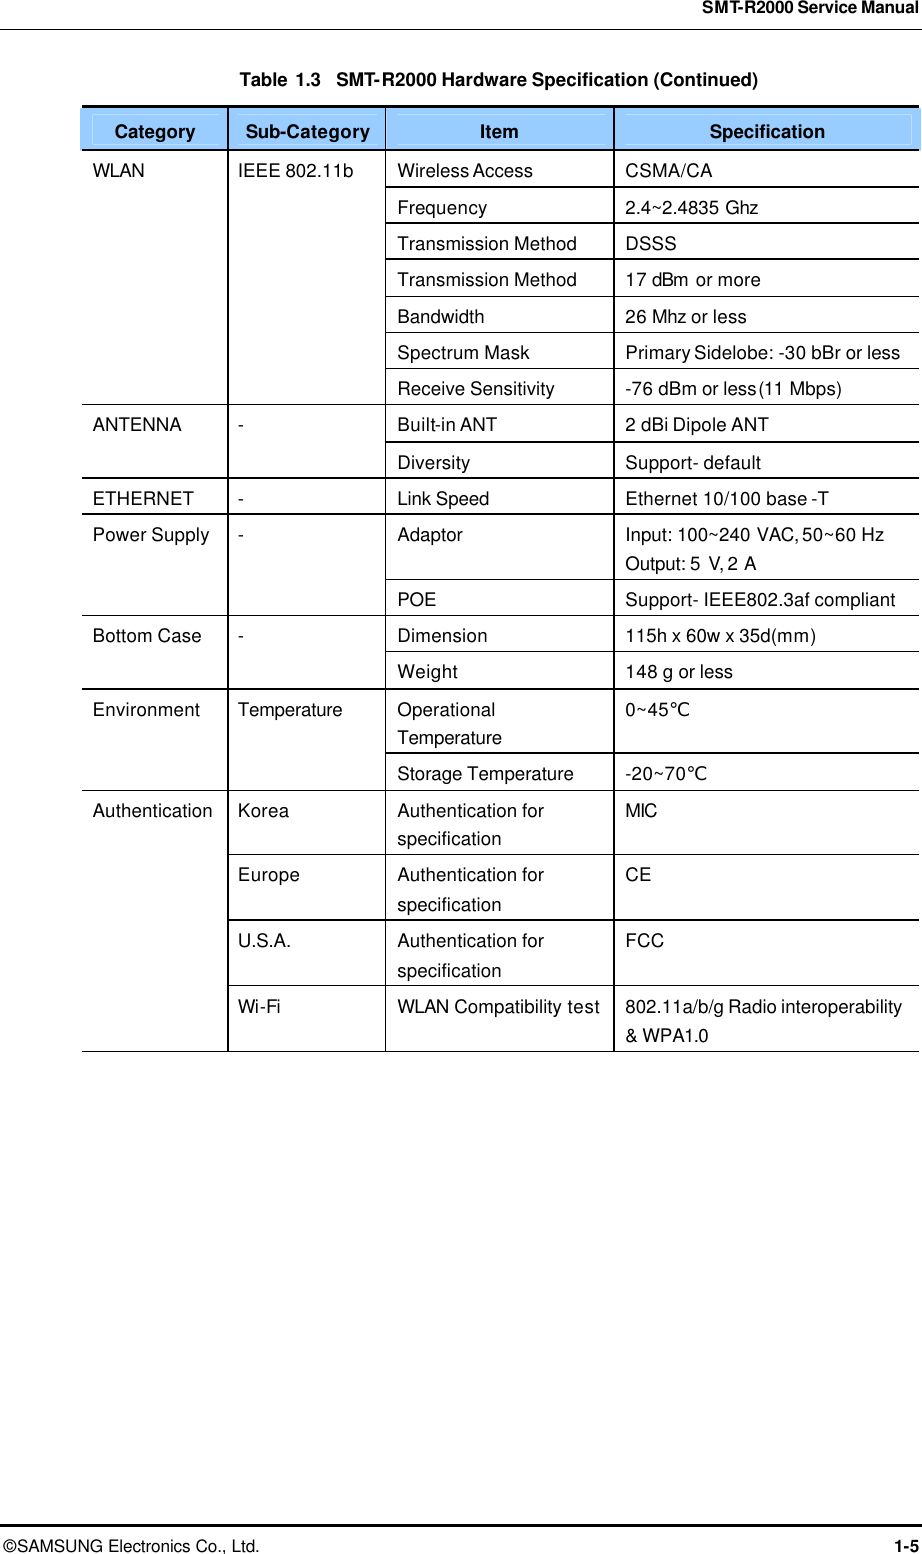  SMT-R2000 Service Manual © SAMSUNG Electronics Co., Ltd. 1-5 Table 1.3  SMT-R2000 Hardware Specification (Continued) Category Sub-Category Item Specification Wireless Access CSMA/CA Frequency 2.4~2.4835 Ghz   Transmission Method DSSS Transmission Method 17 dBm  or more Bandwidth 26 Mhz or less Spectrum Mask Primary Sidelobe: -30 bBr or less WLAN IEEE 802.11b Receive Sensitivity -76 dBm or less(11 Mbps) Built-in ANT 2 dBi Dipole ANT ANTENNA - Diversity Support- default ETHERNET - Link Speed Ethernet 10/100 base -T Adaptor Input: 100~240 VAC, 50~60 Hz   Output: 5 V, 2  A Power Supply - POE Support- IEEE802.3af compliant Dimension 115h x 60w x 35d(mm) Bottom Case - Weight 148 g or less Operational Temperature 0~45℃   Environment Temperature Storage Temperature -20~70℃ Korea Authentication for specification MIC Europe Authentication for specification CE U.S.A. Authentication for specification FCC Authentication Wi-Fi WLAN Compatibility test  802.11a/b/g Radio interoperability &amp; WPA1.0      